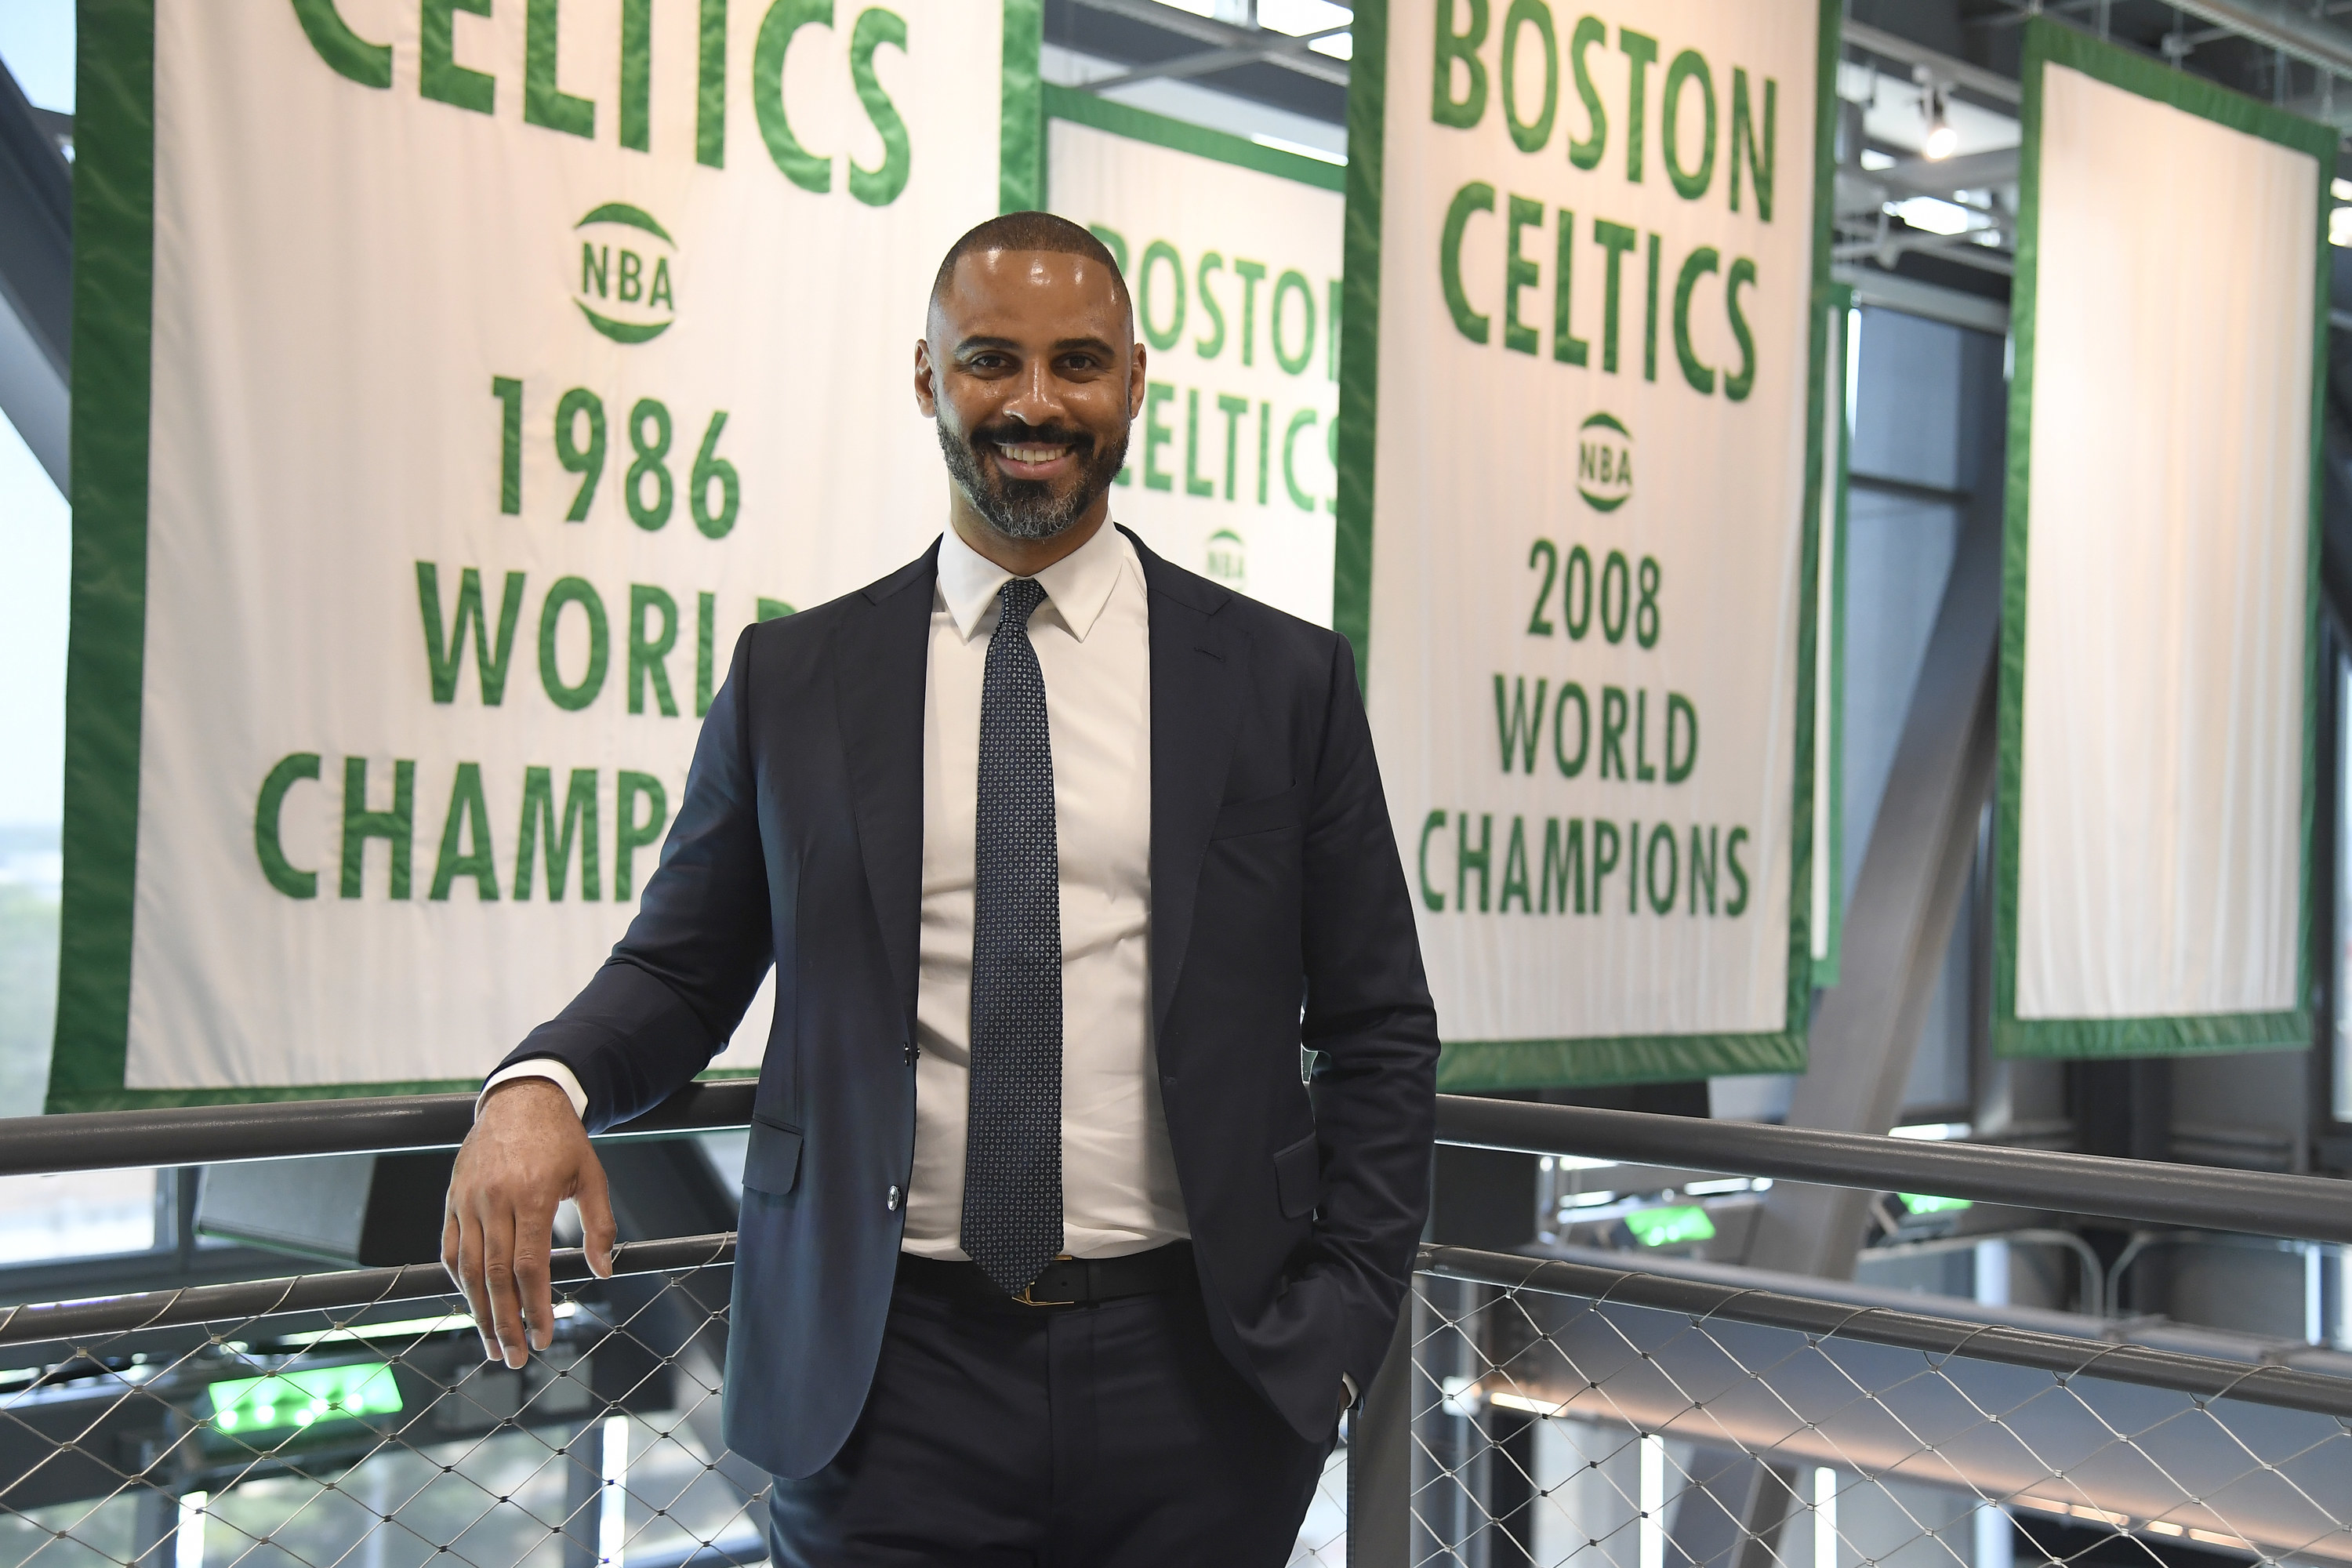 Ime poses in front of Celtics banners